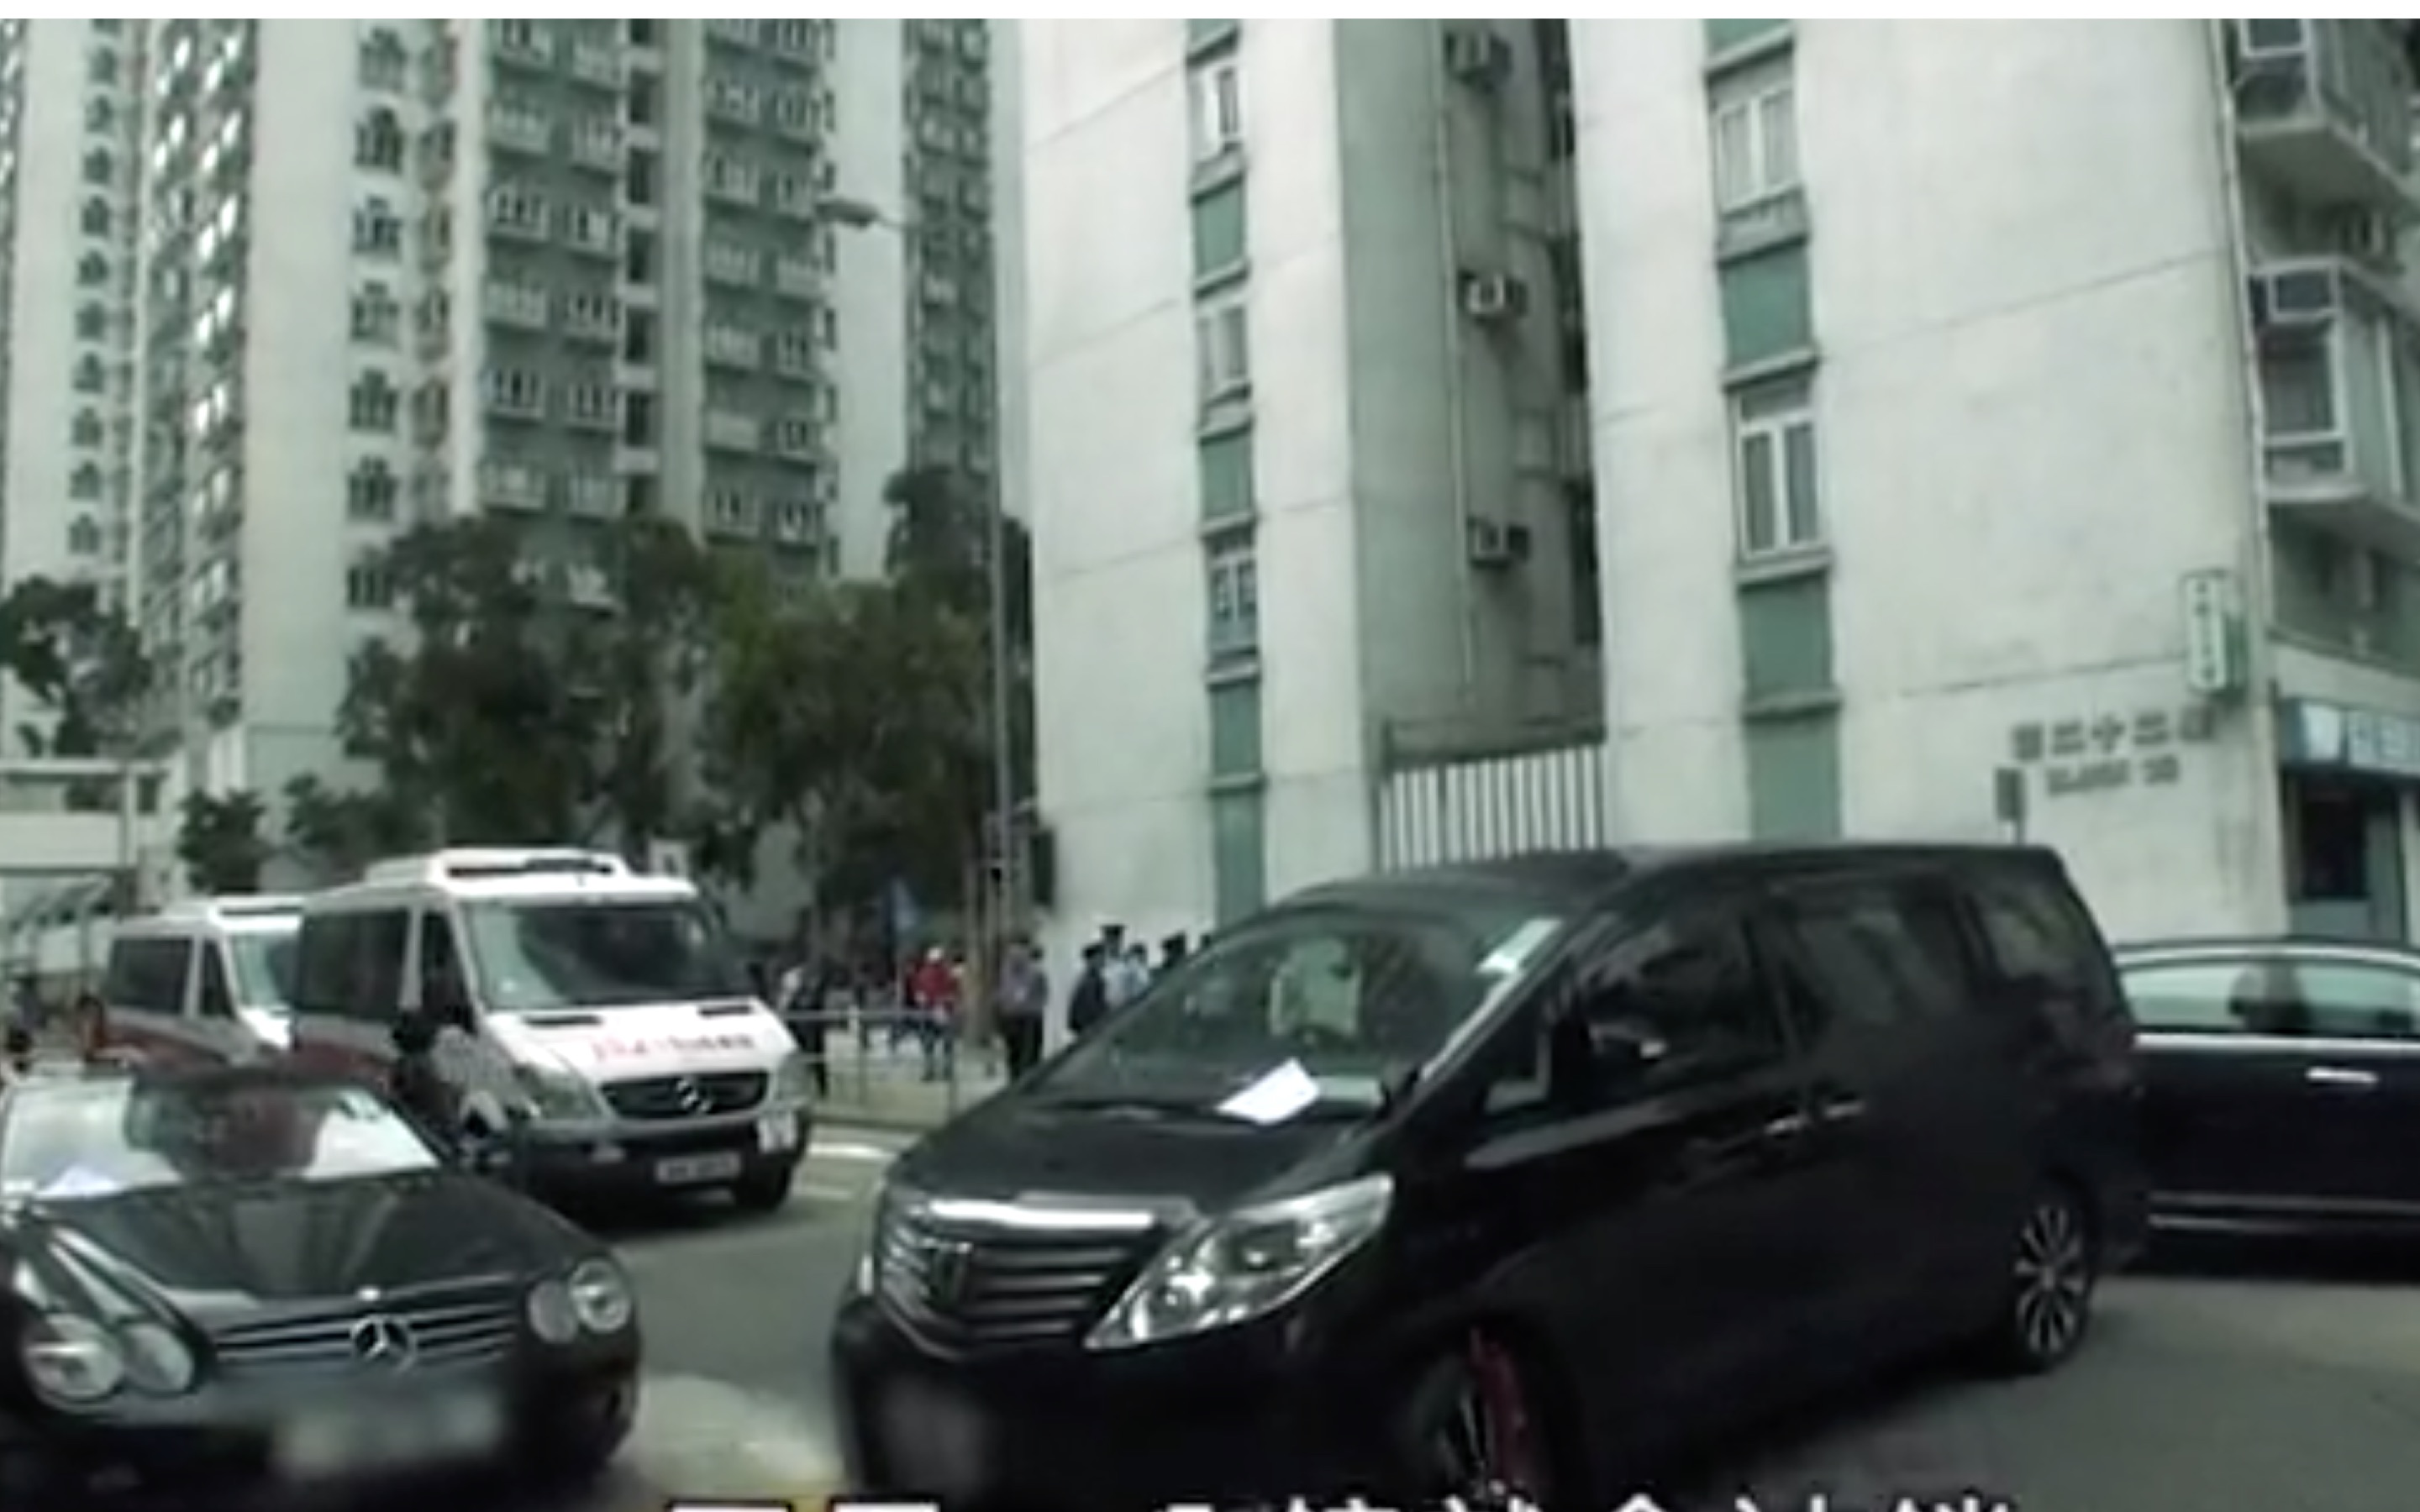 A Mercedes Benz, Toyota, and Lexus all owned by the same man block a road near a housing estate after the owner of all three cars had one of them clamped. Screengrab via Apple Daily video.